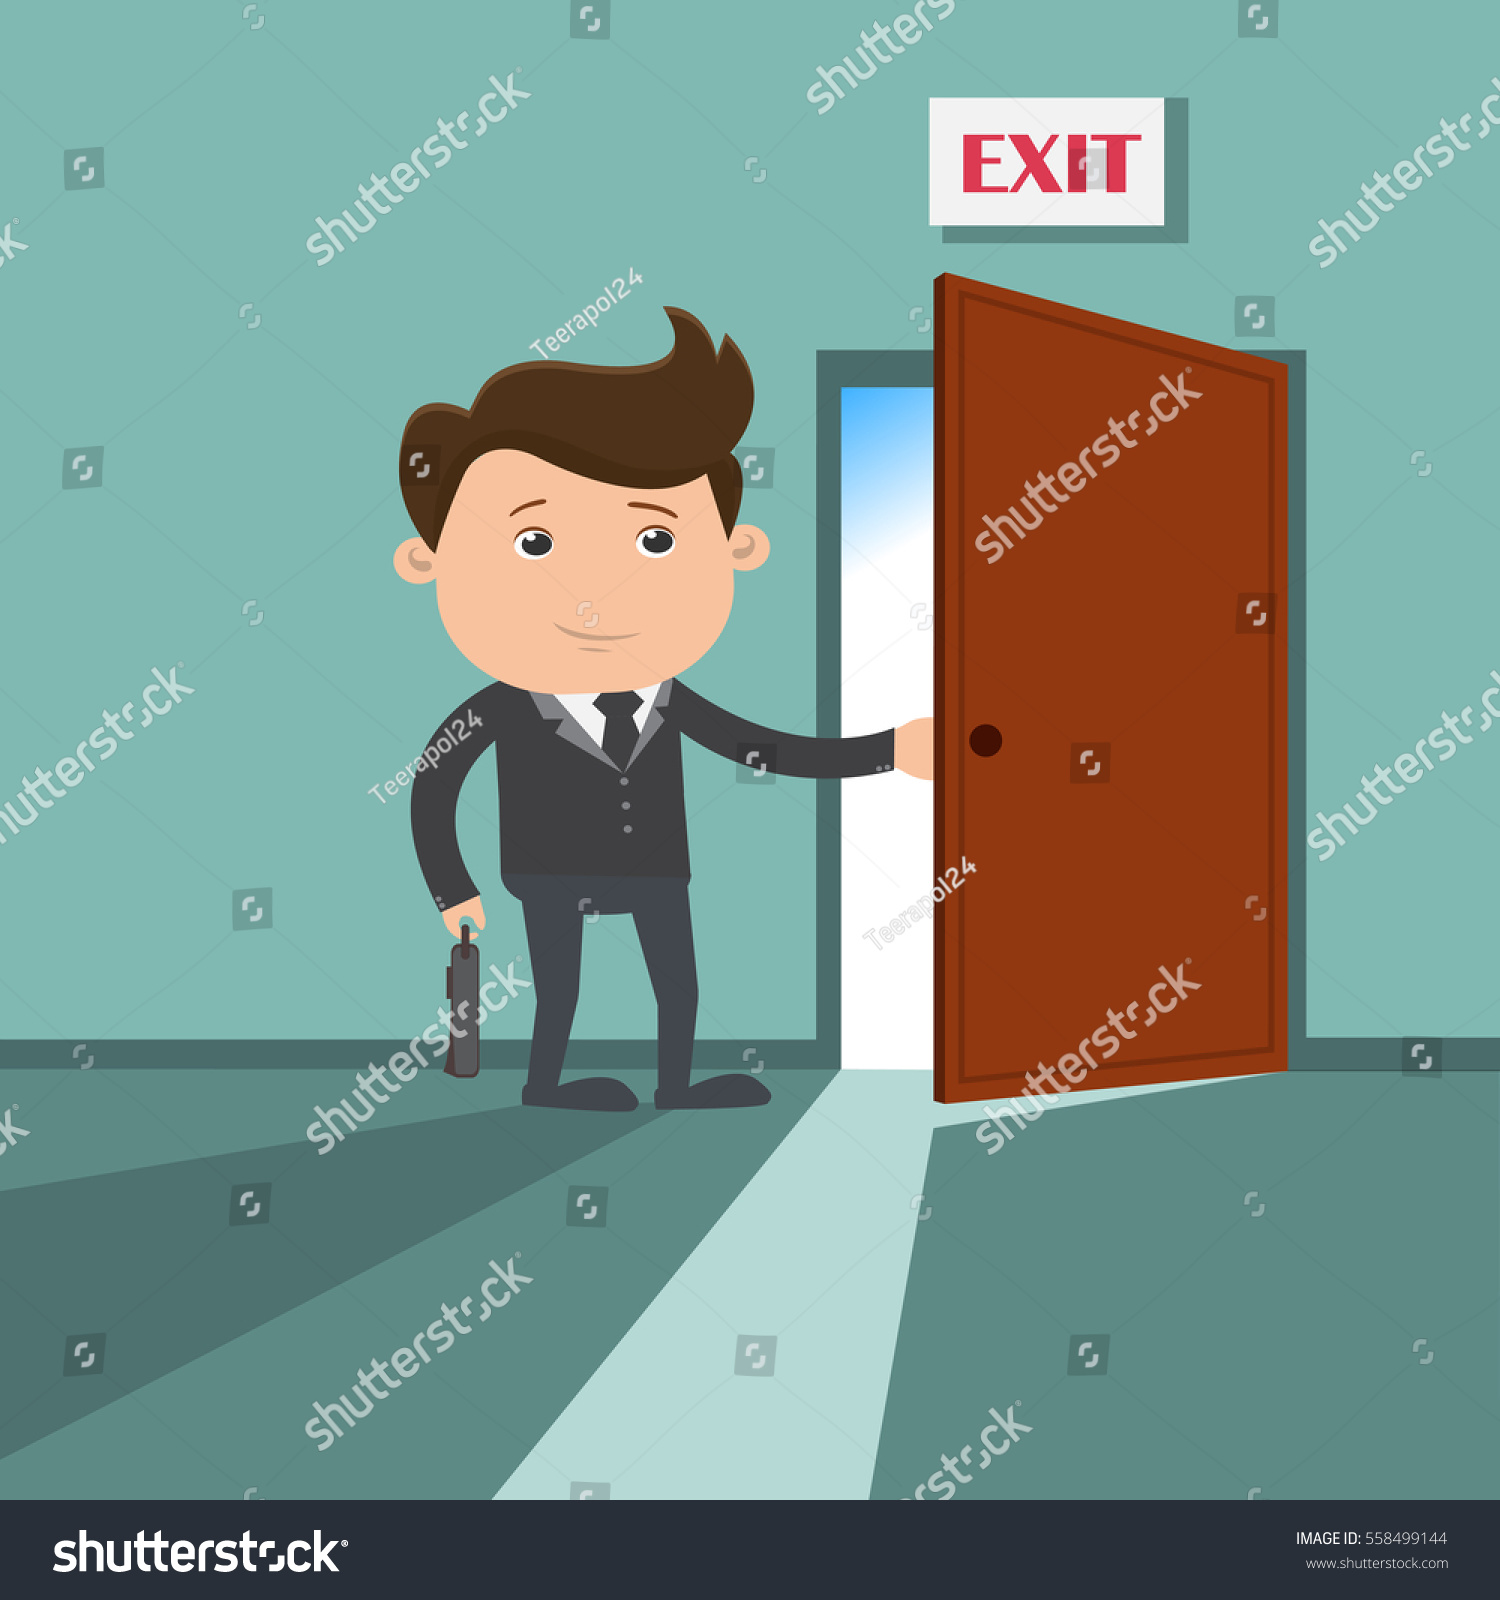 Businessman going to the exit - vector illustration